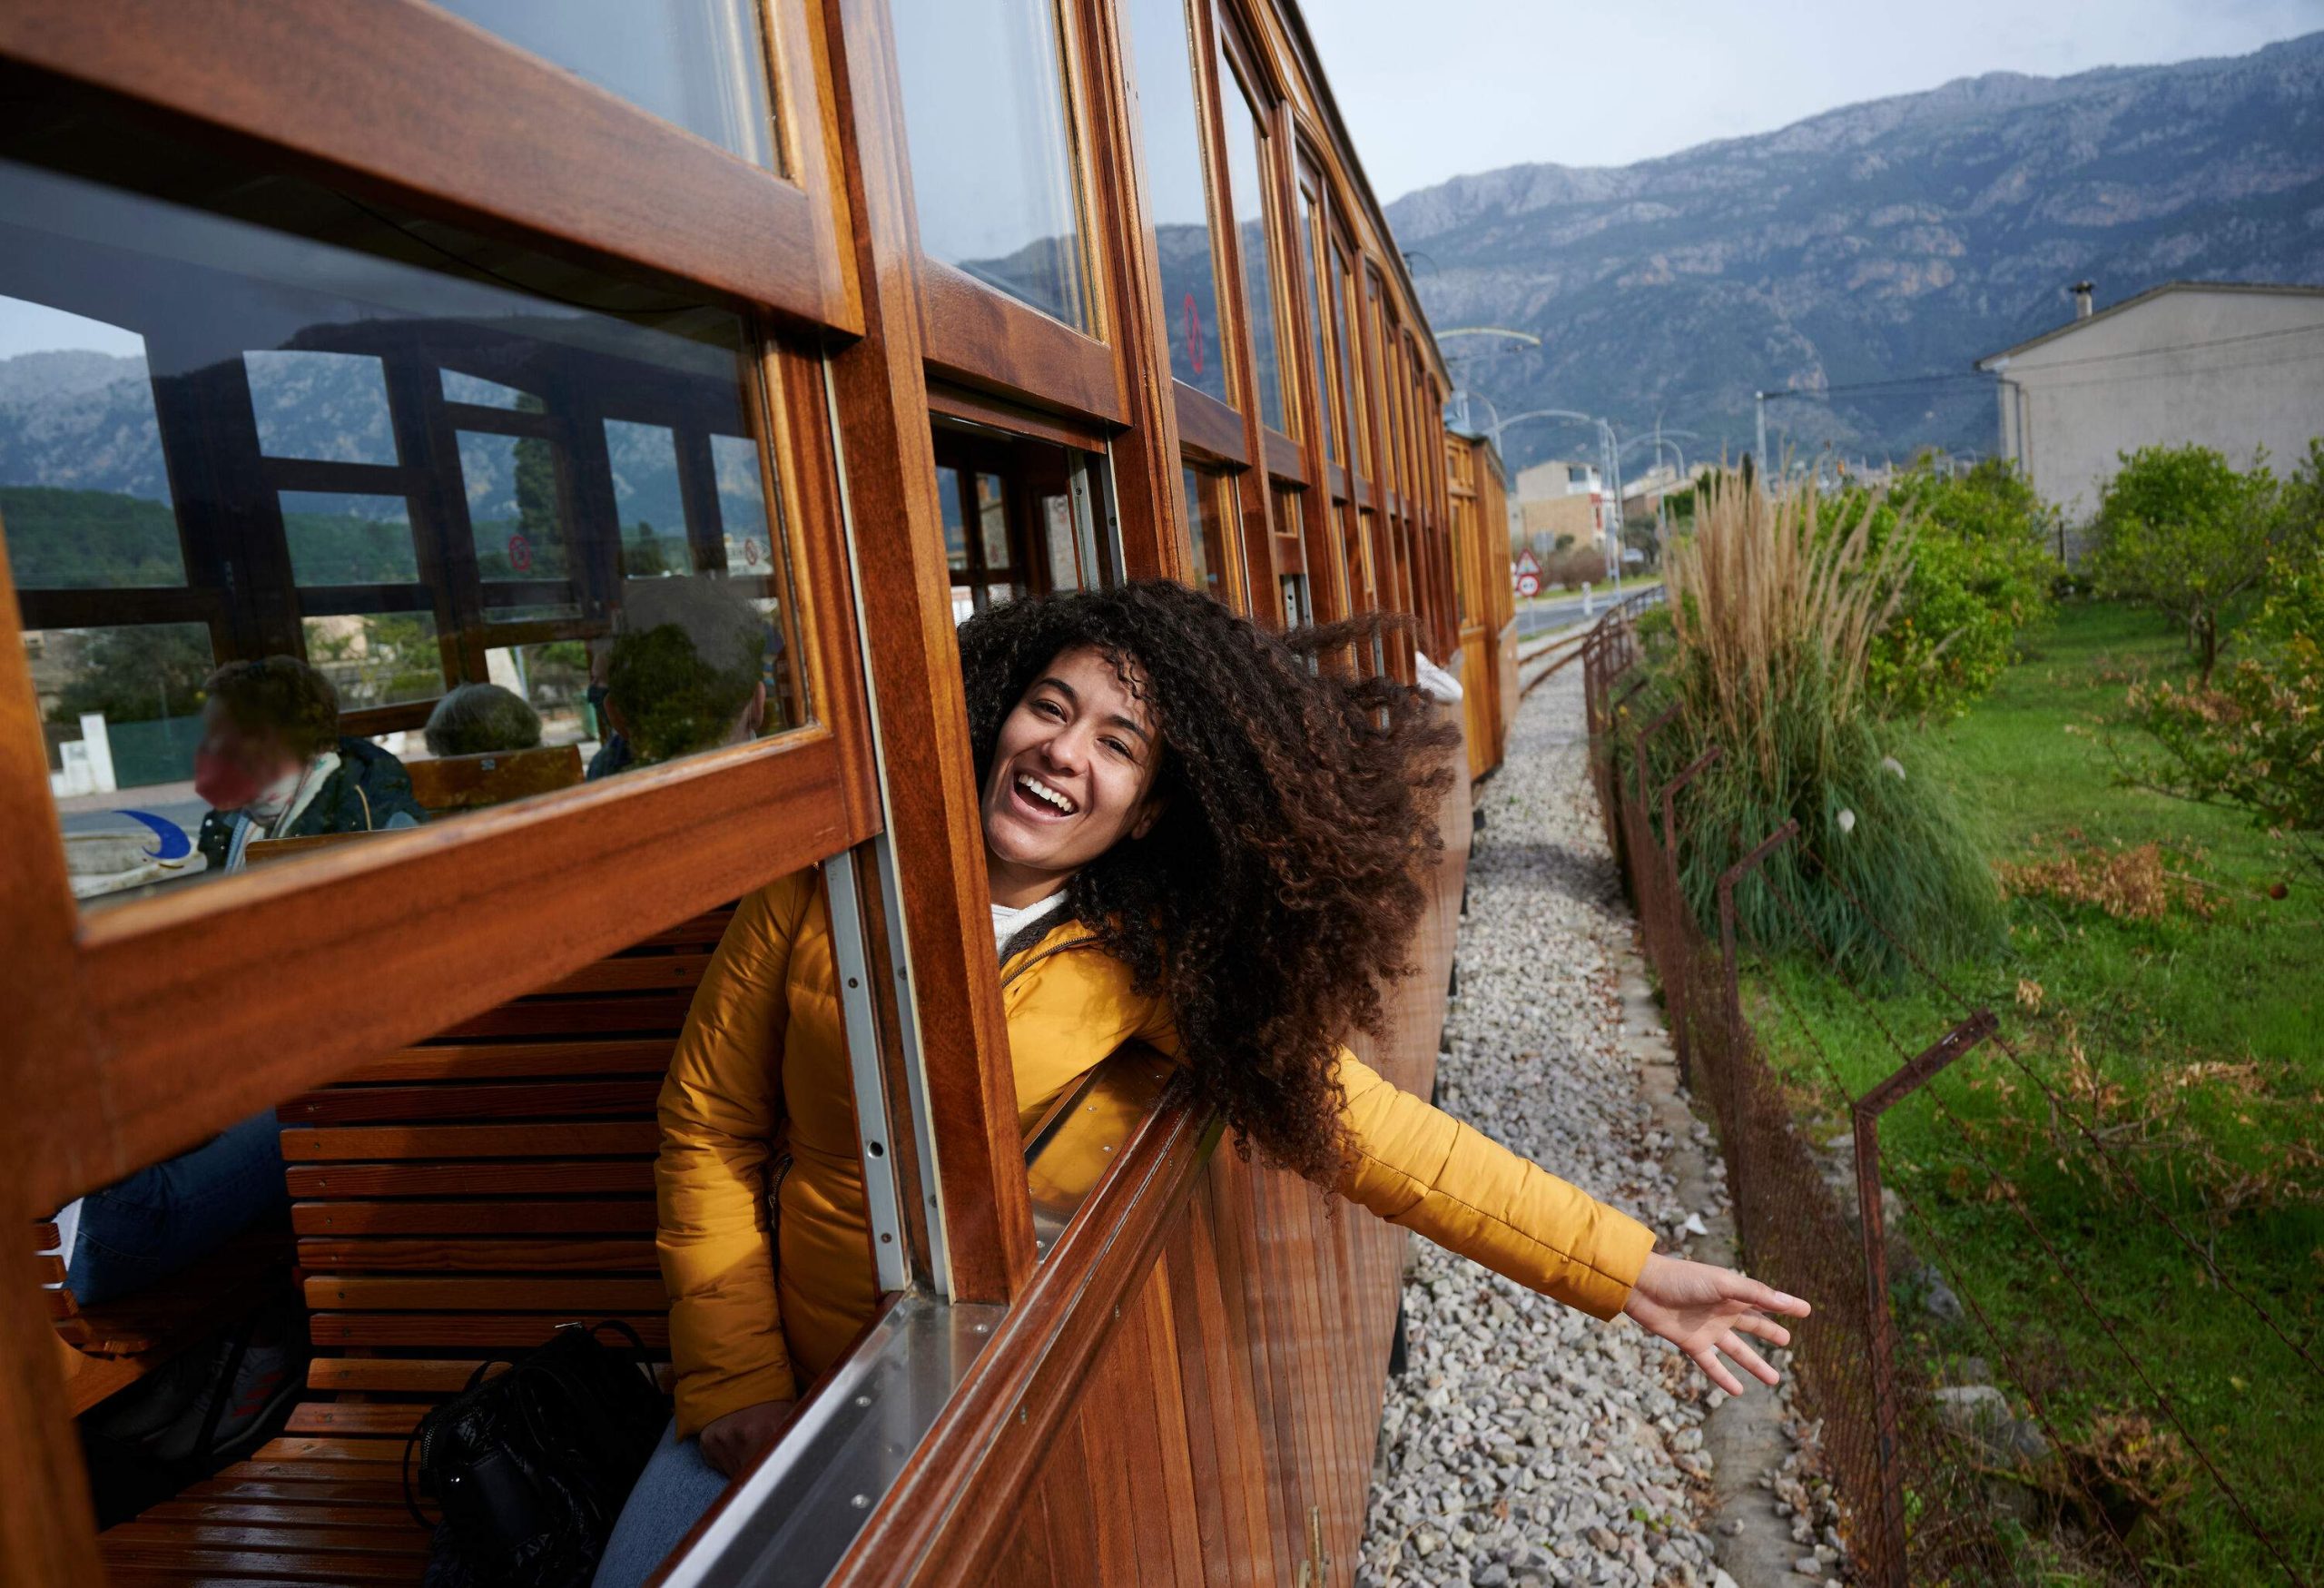 A happy woman with beautiful long curly hair peeking her head out of a train window.